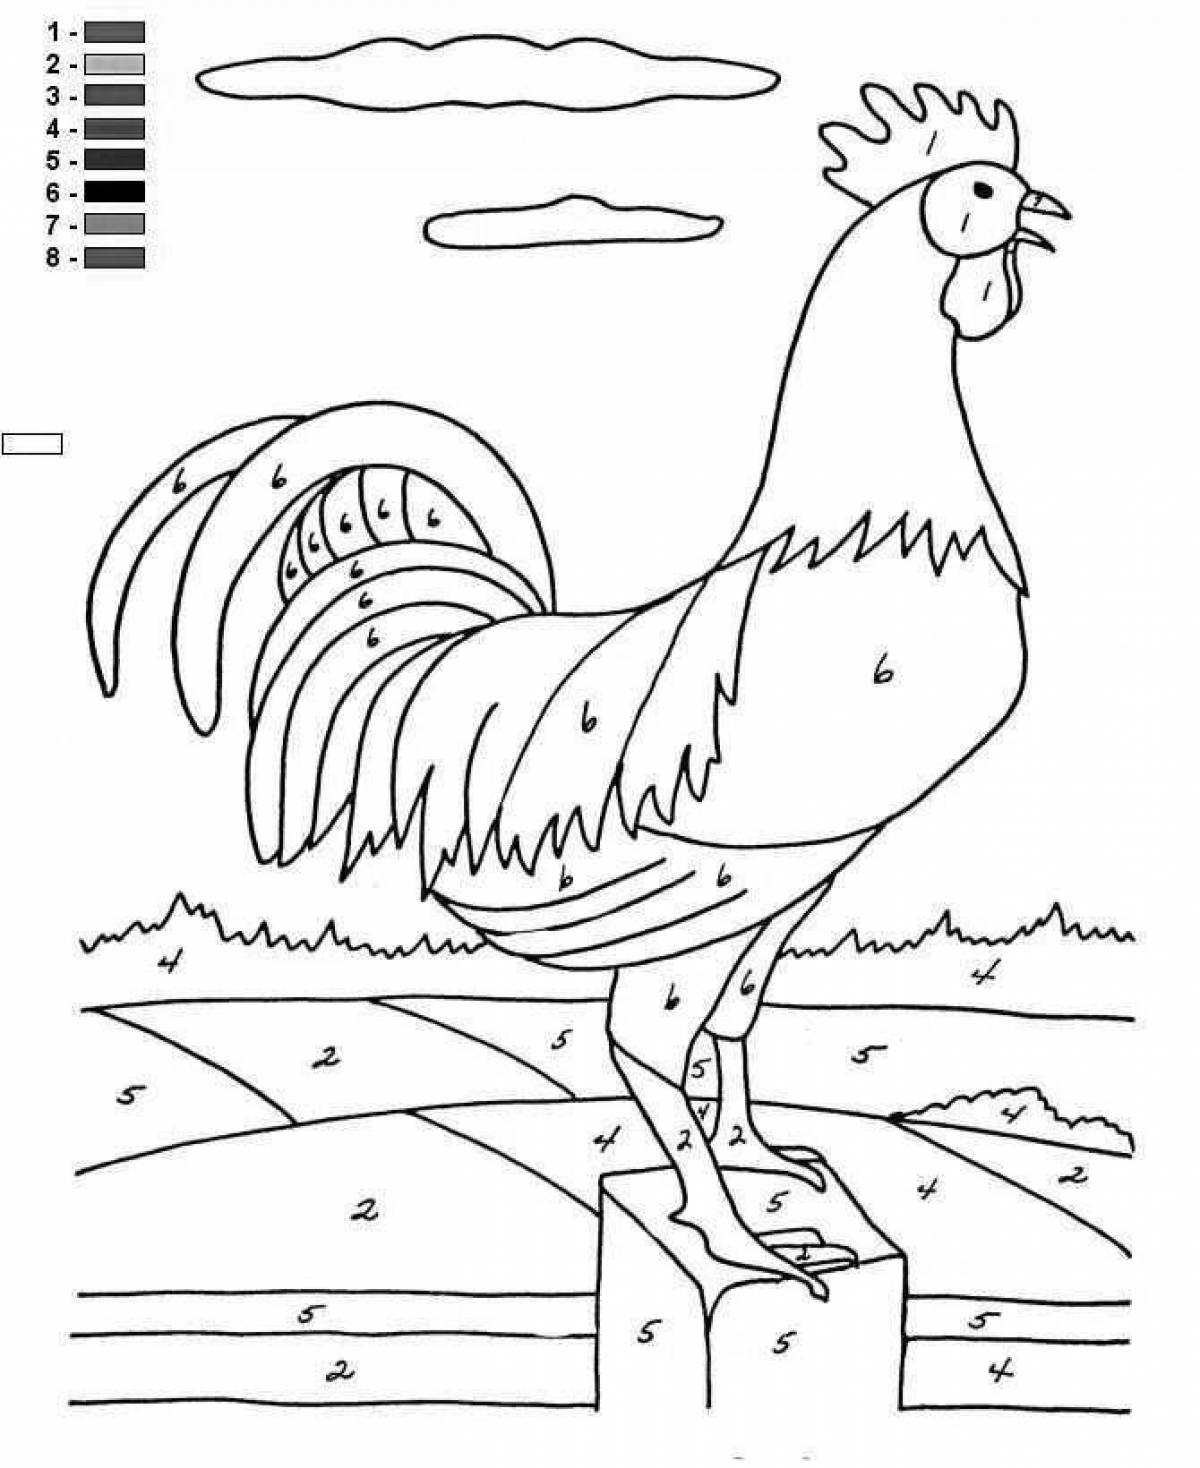 Rooster by numbers #1